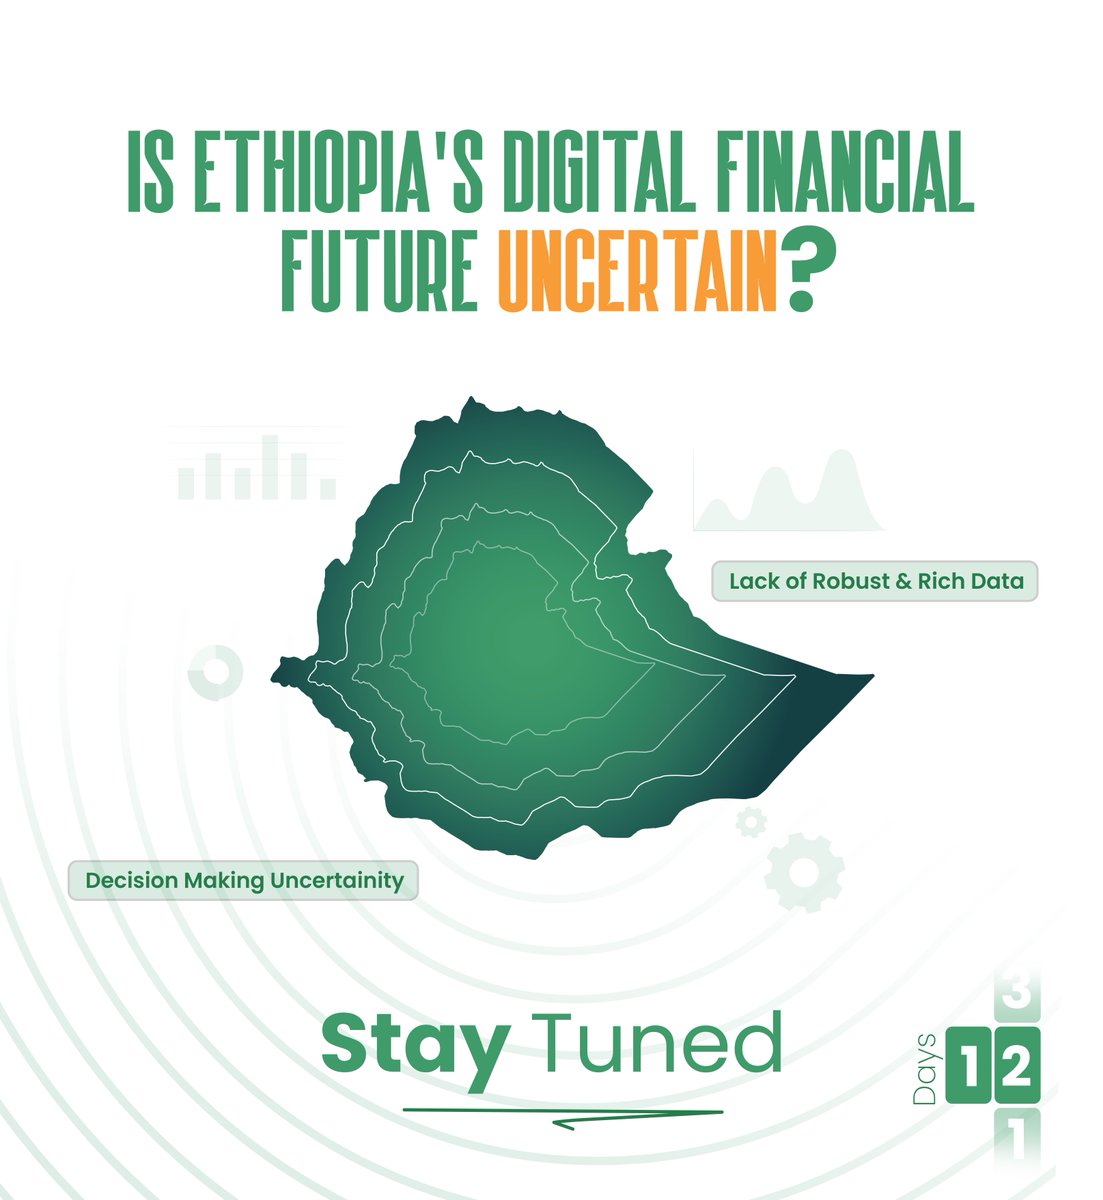 Ethiopia's digital finance revolution is booming, but a key piece is missing: quality data for informed decisions. 

Tune in next week as we explore this challenge and a potential solution on the horizon.

#DigitalFinance #FinancialInclusion #AKOFADA #Ethiopia